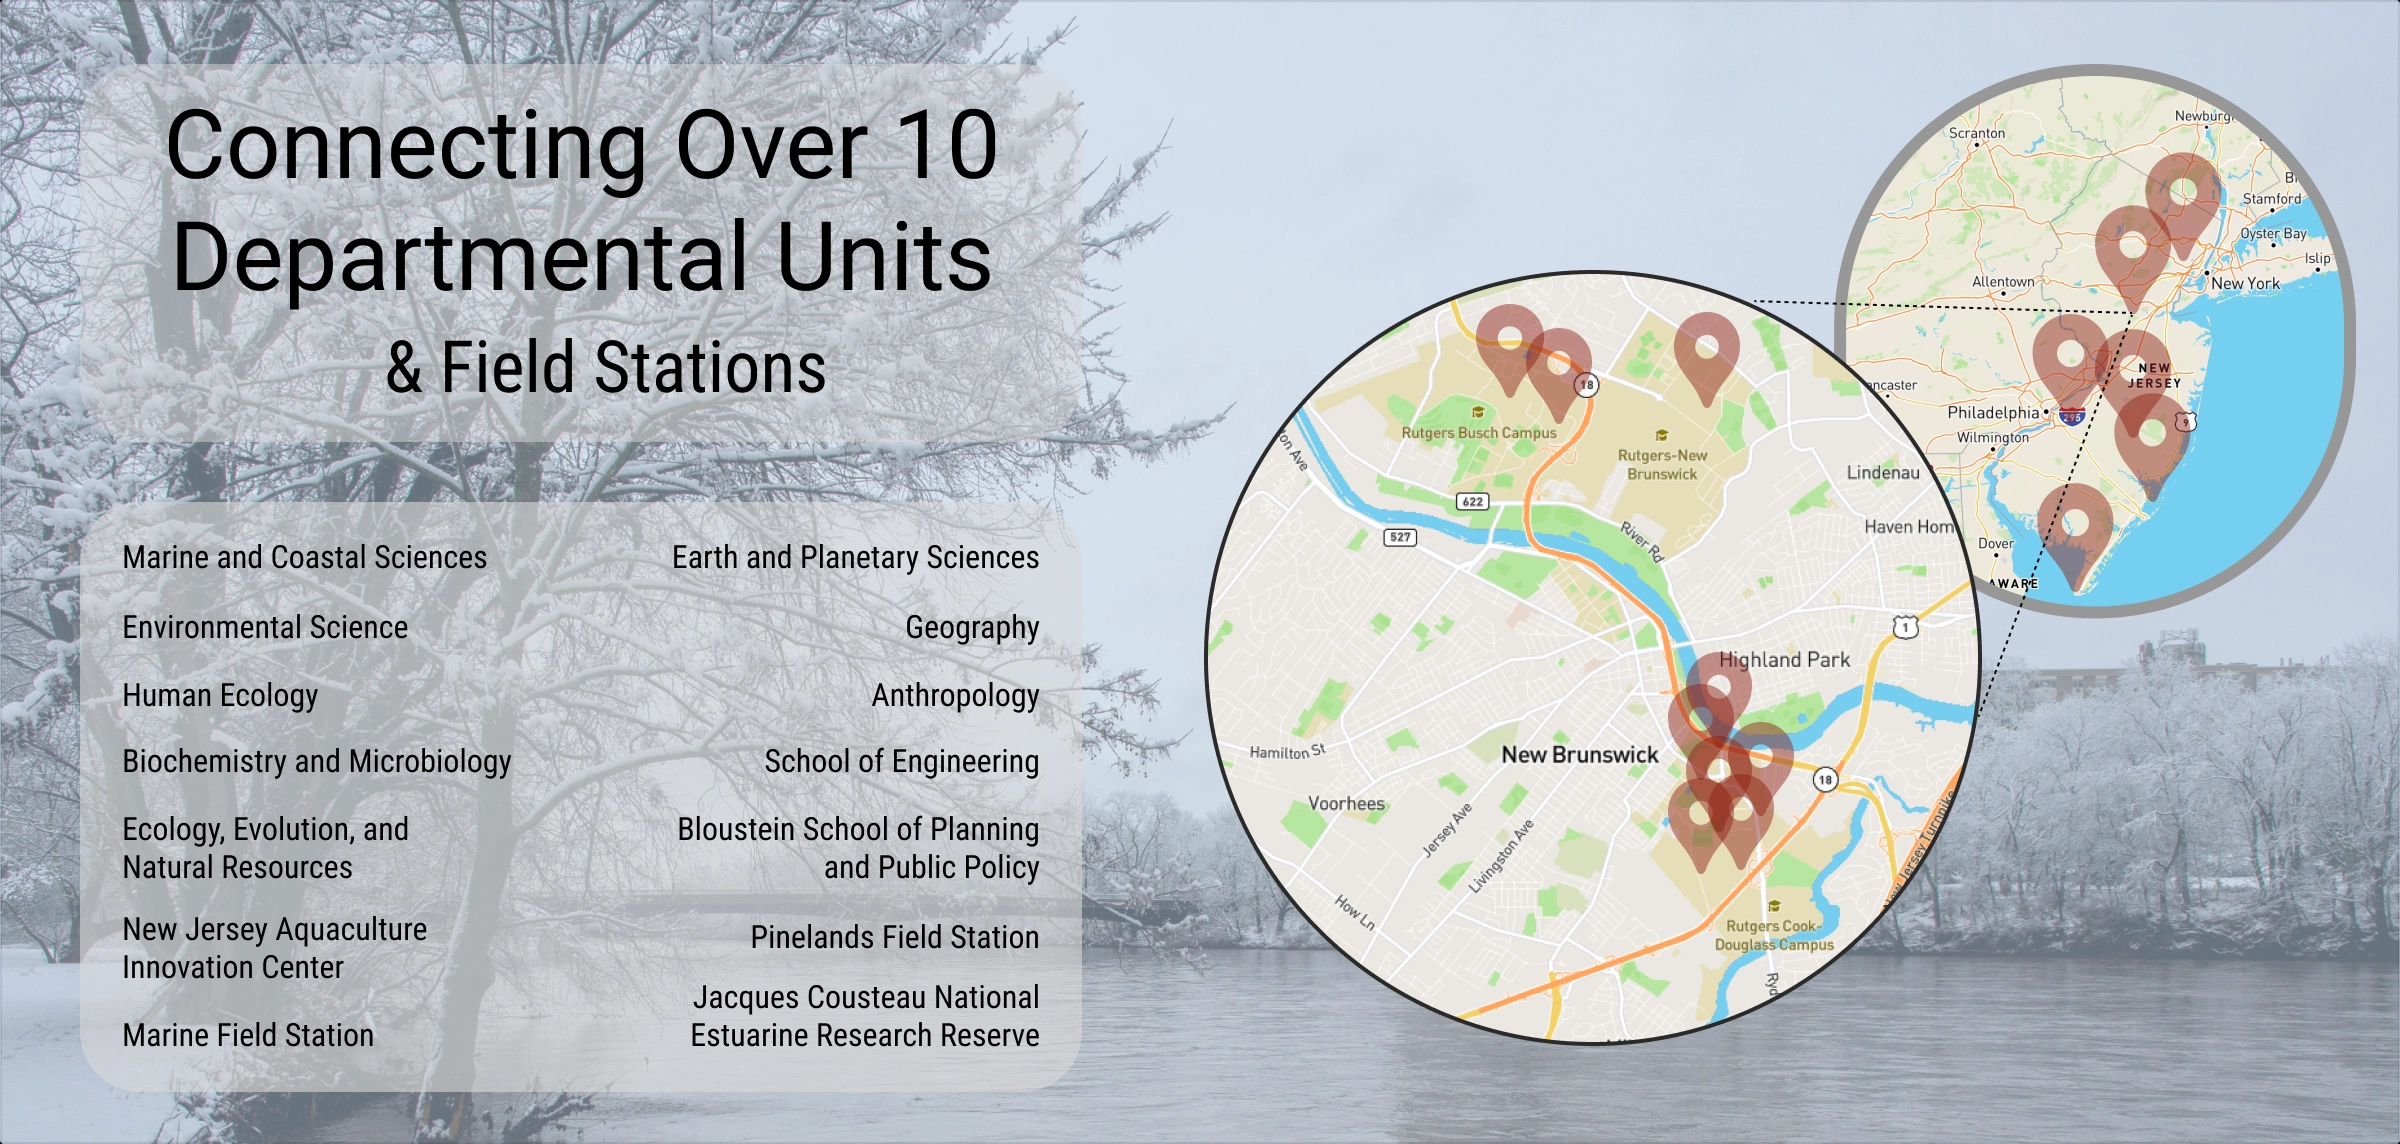 Connecting Over 10 Departmental Units & Field Stations